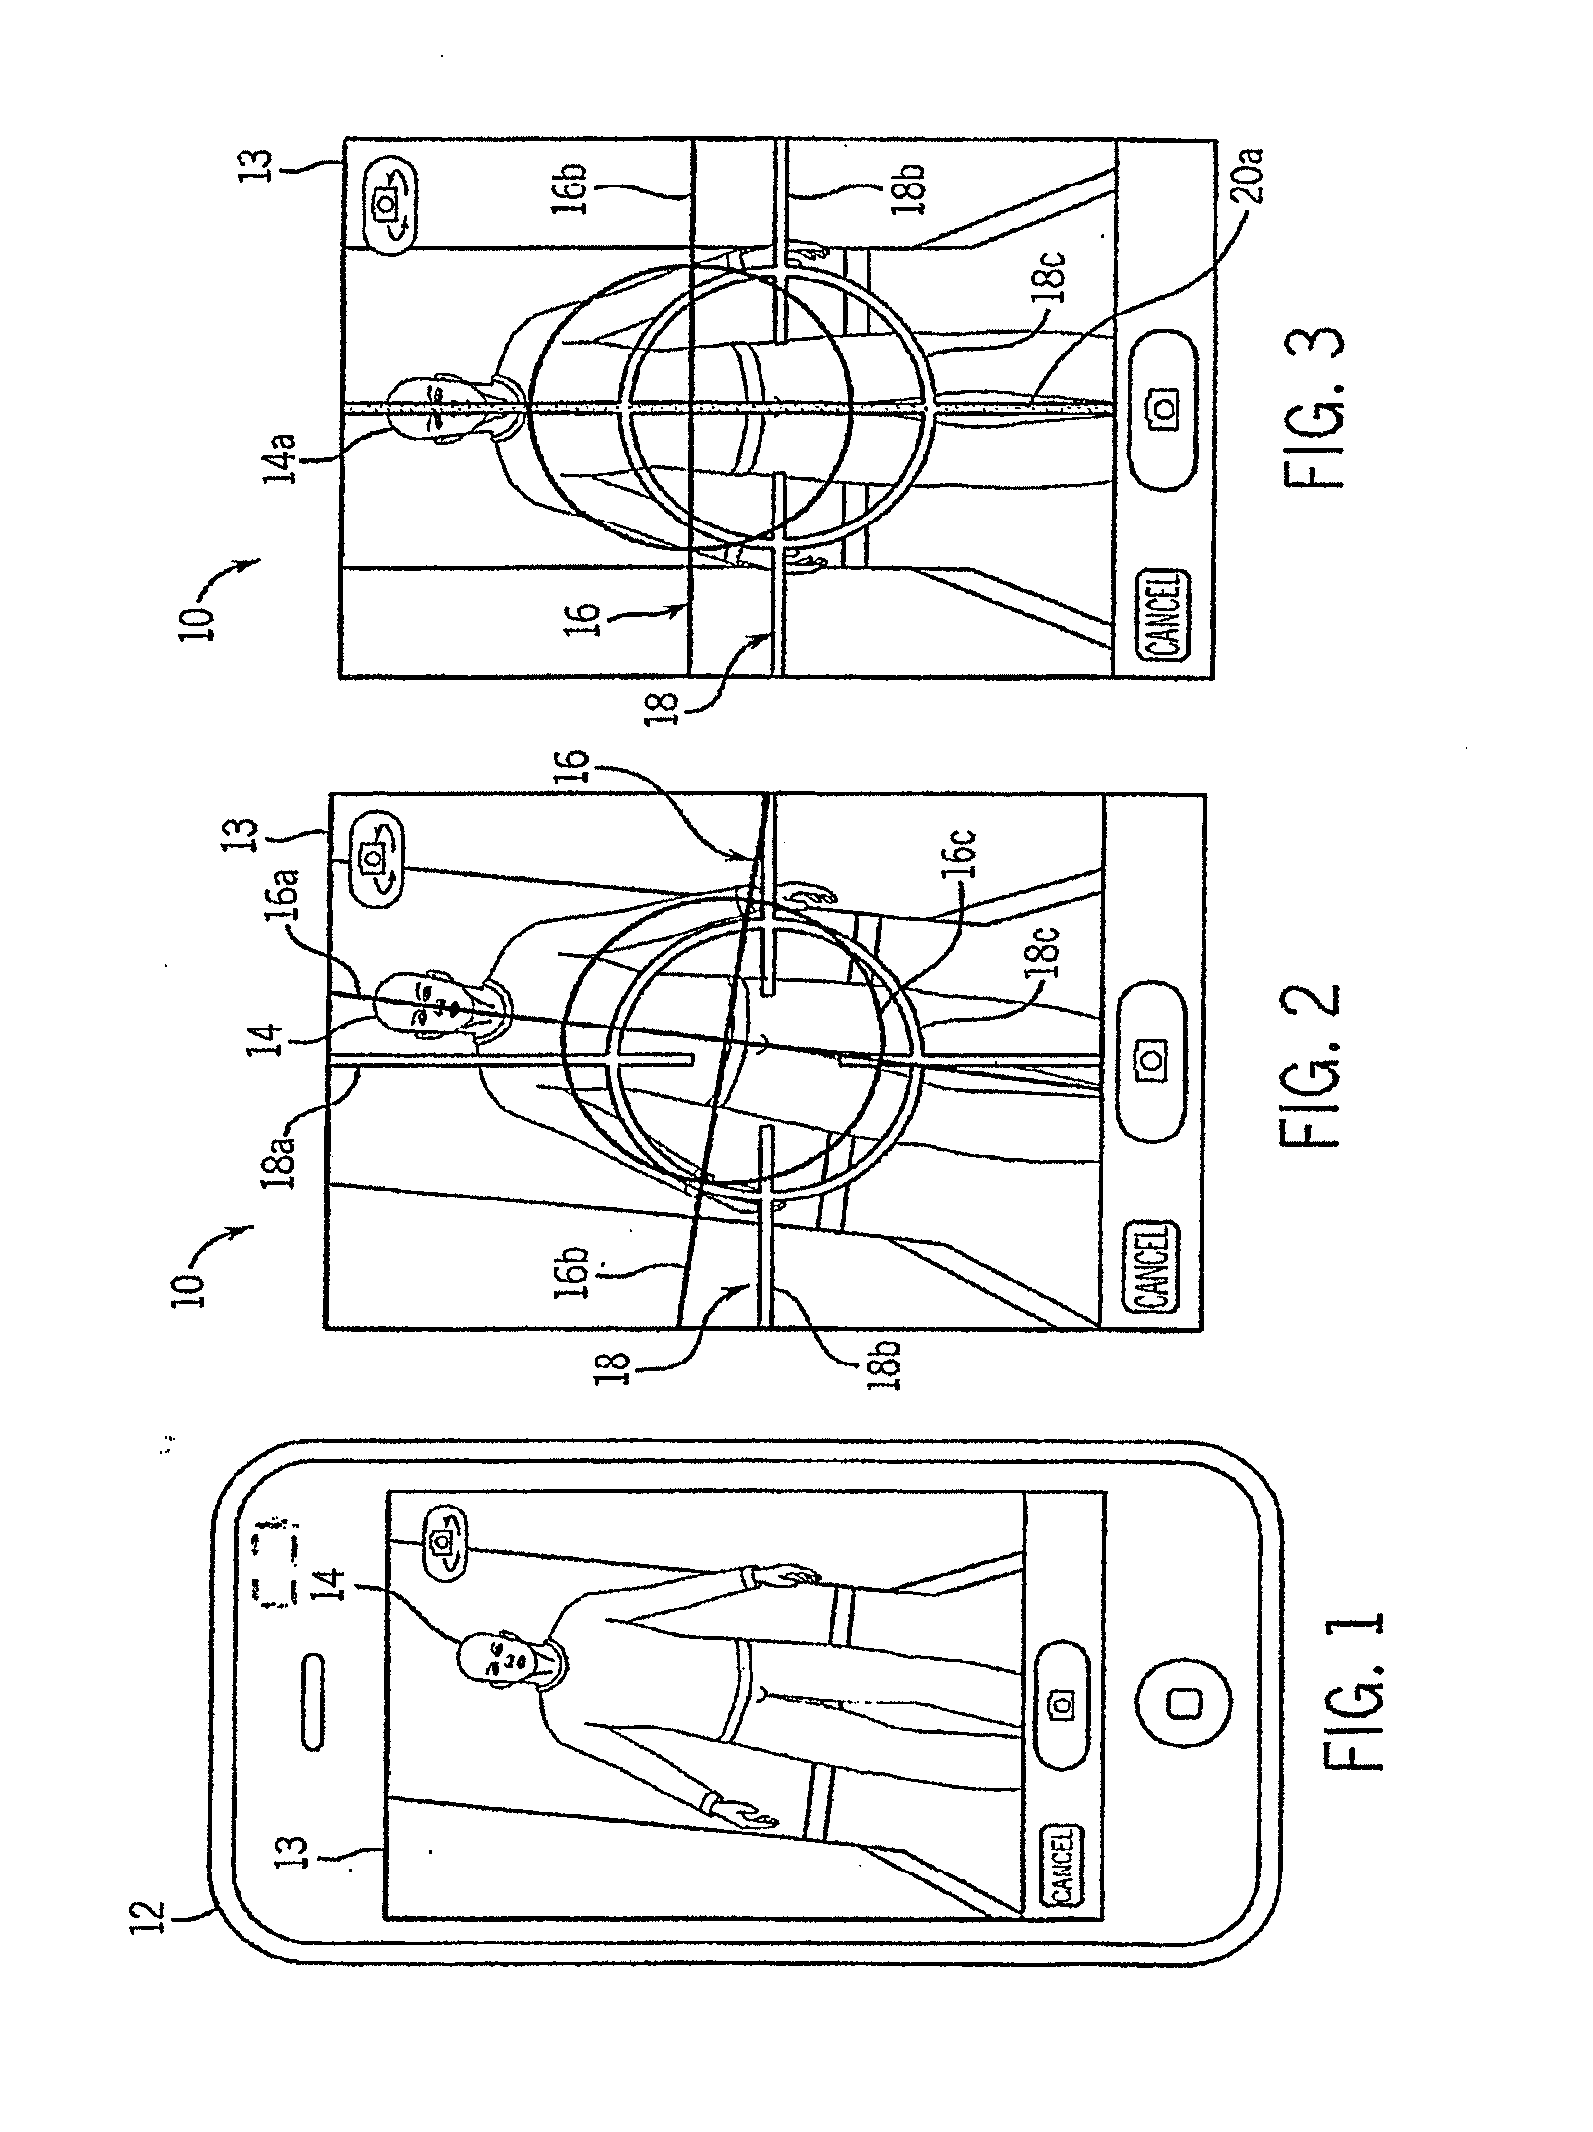 Method and system for postural analysis and measuring anatomical dimensions from a digital three-dimensional image on a mobile device